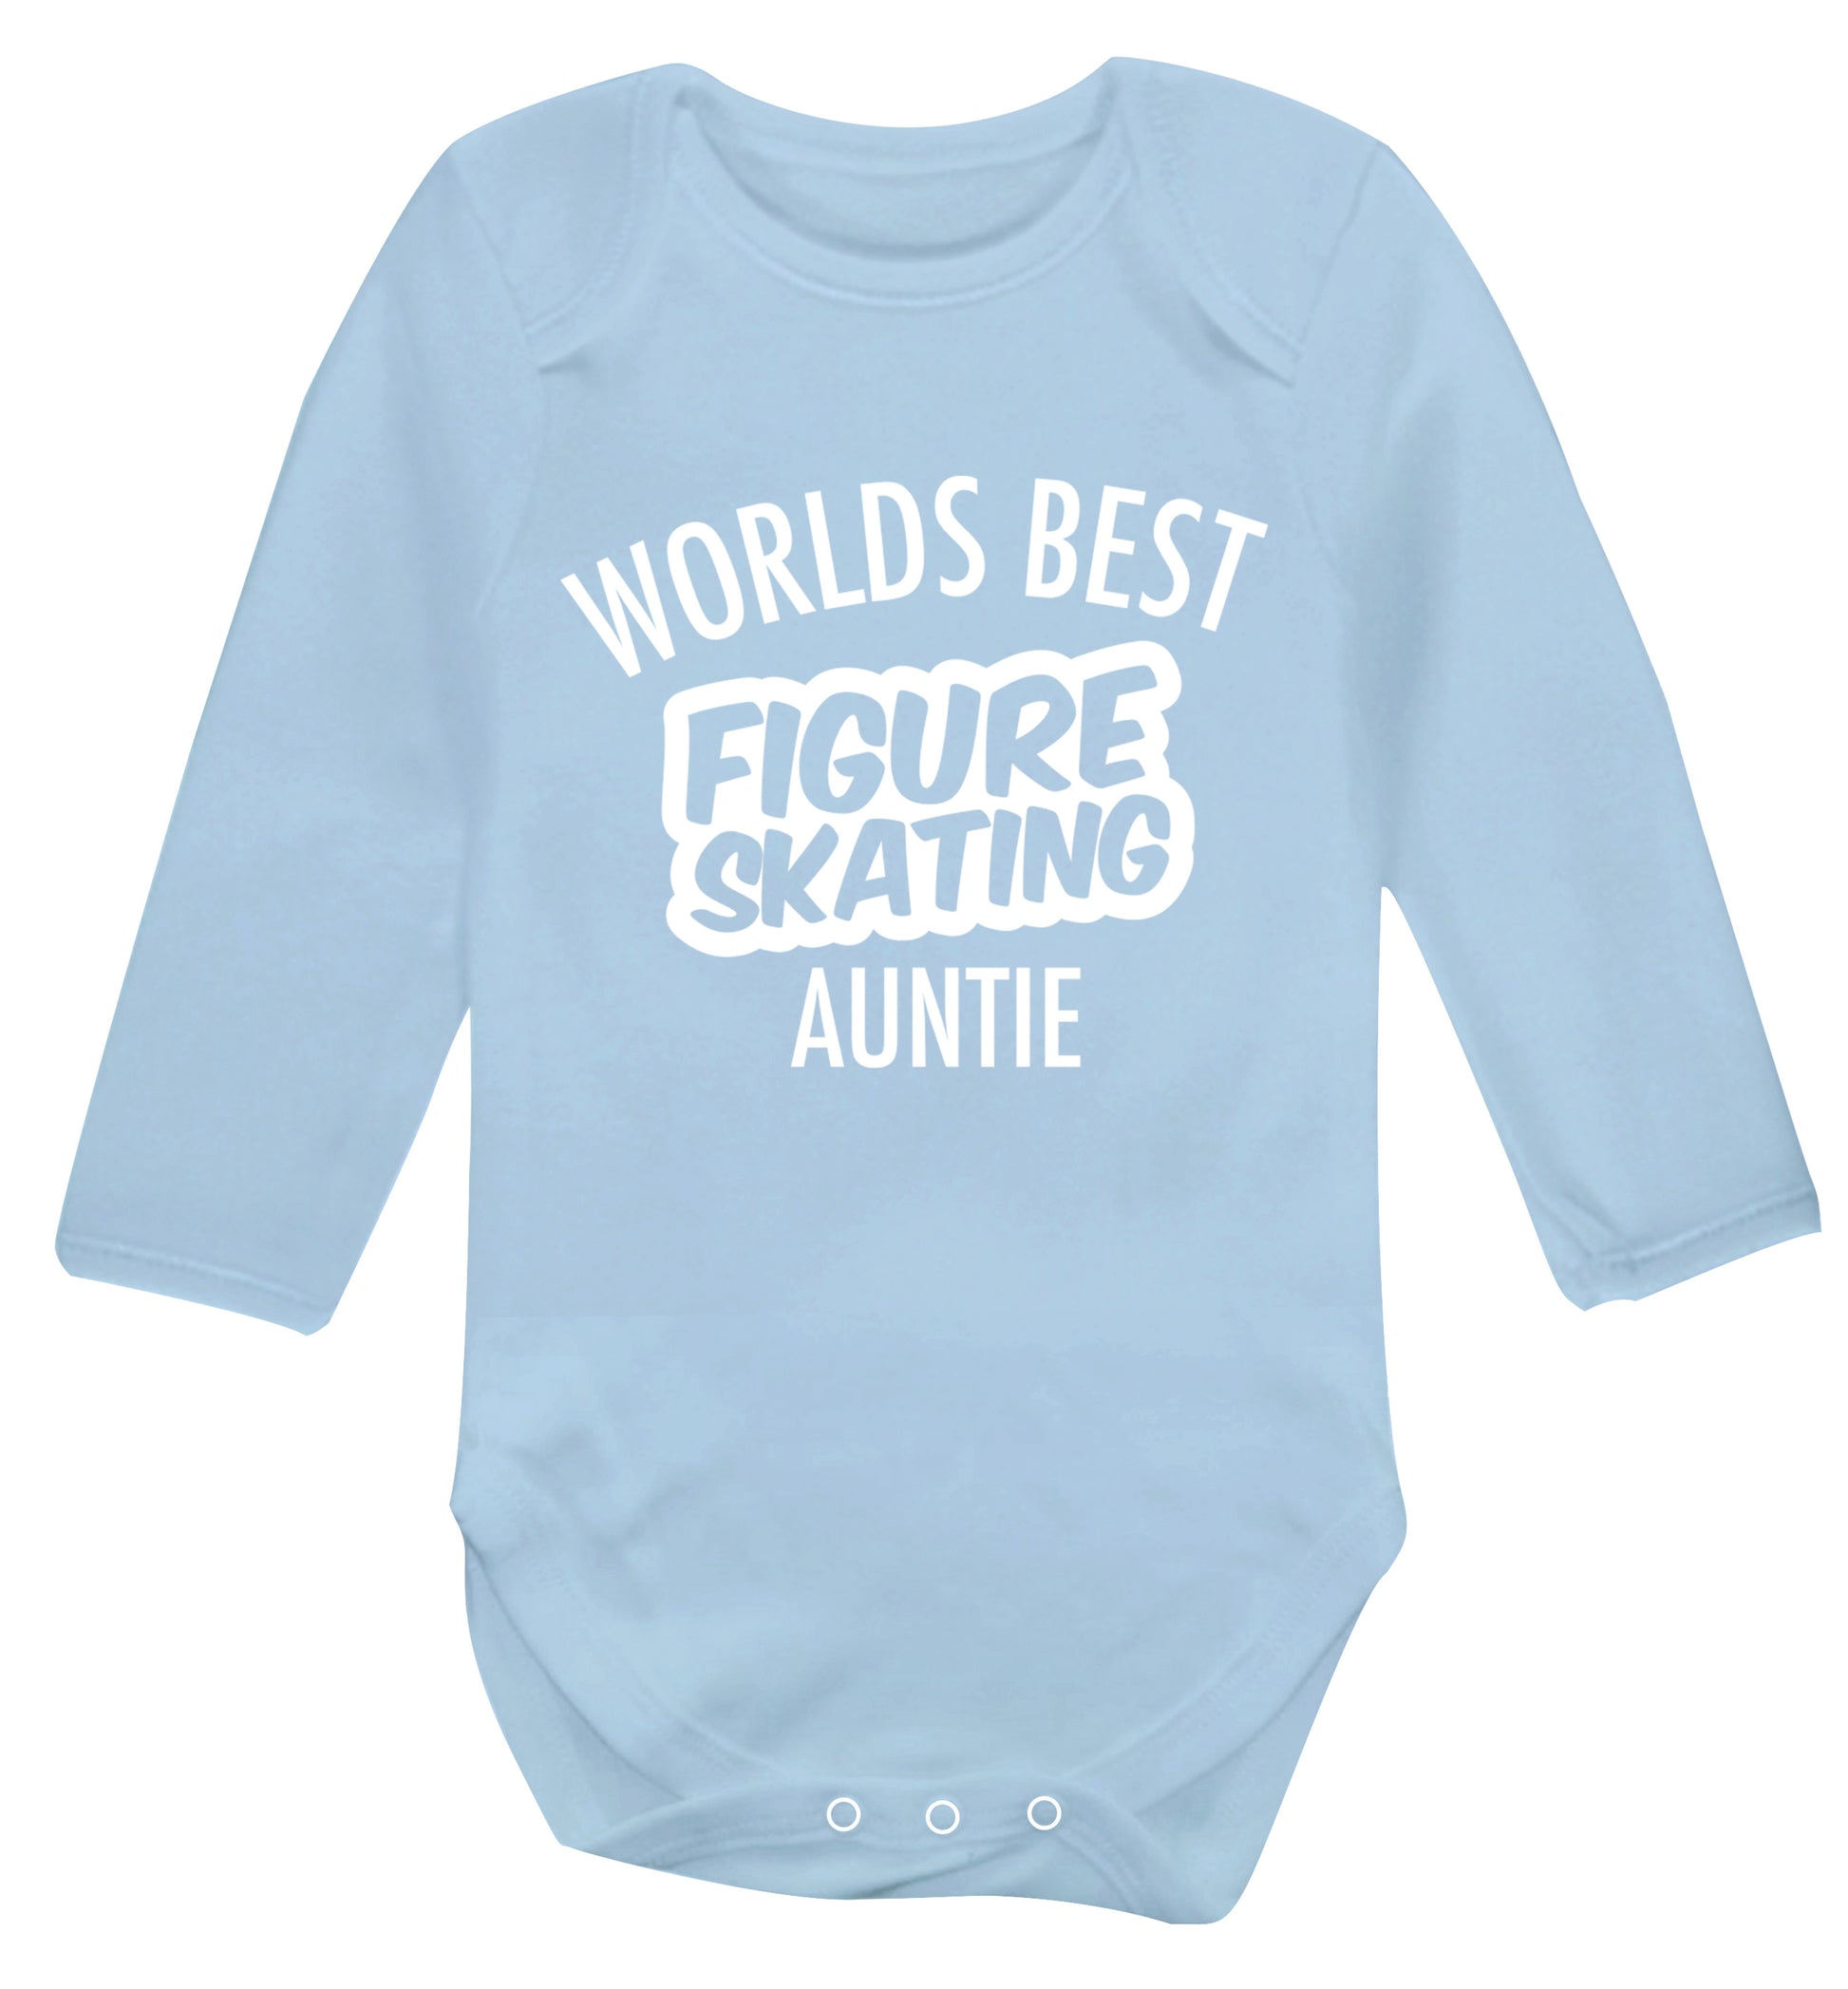 Worlds best figure skating auntie Baby Vest long sleeved pale blue 6-12 months